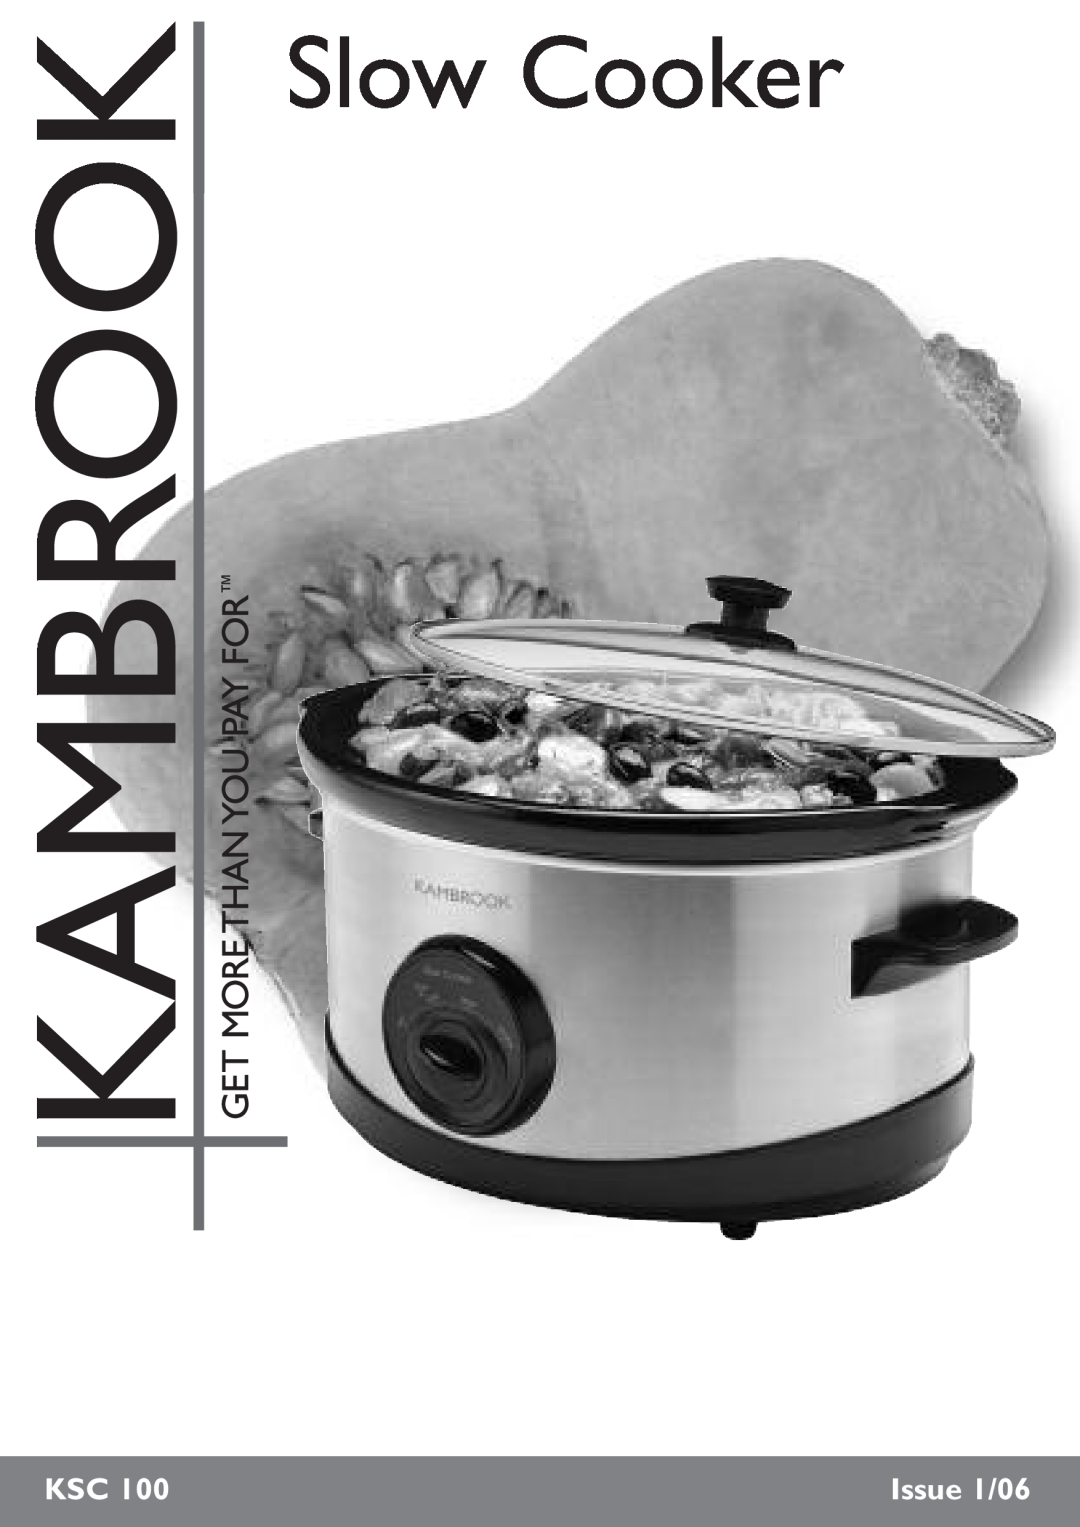 Kambrook KSC 100 manual Slow Cooker, Issue 1/06 